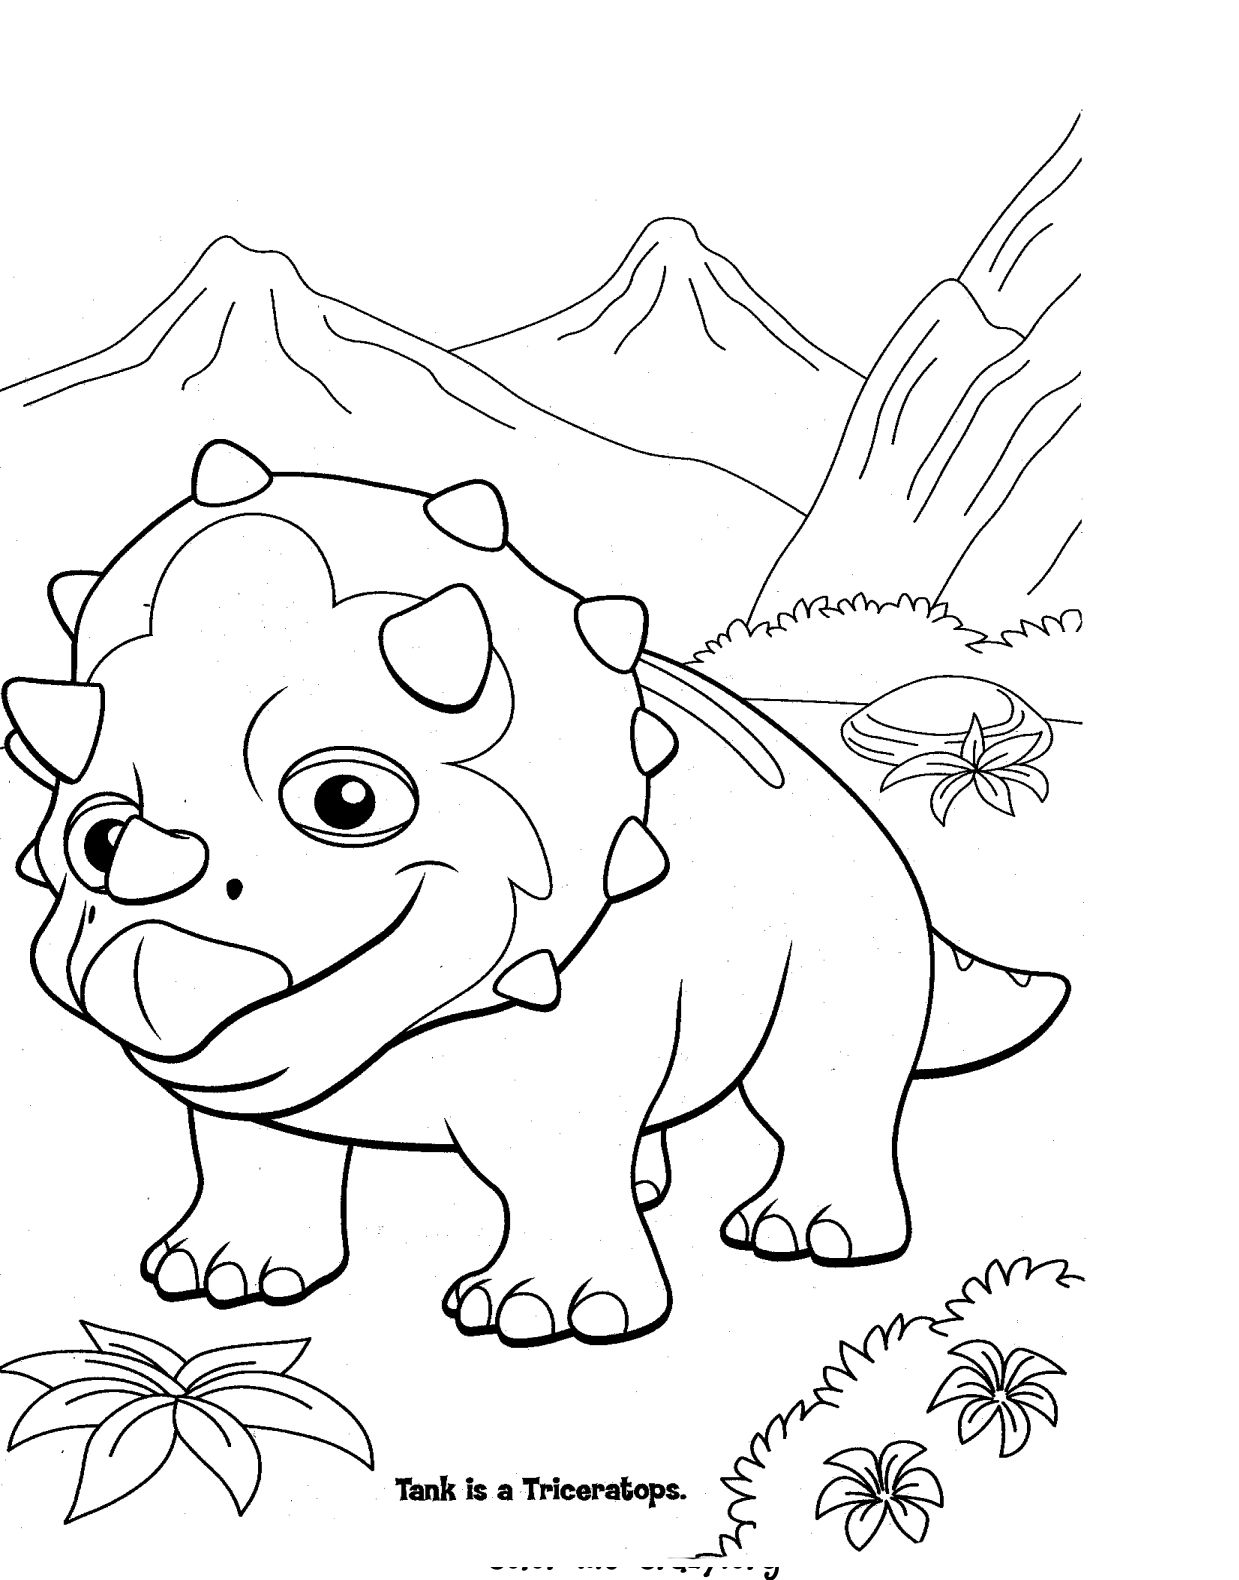  Little Dinosaur Coloring Pages  | Coloring pages for Boys